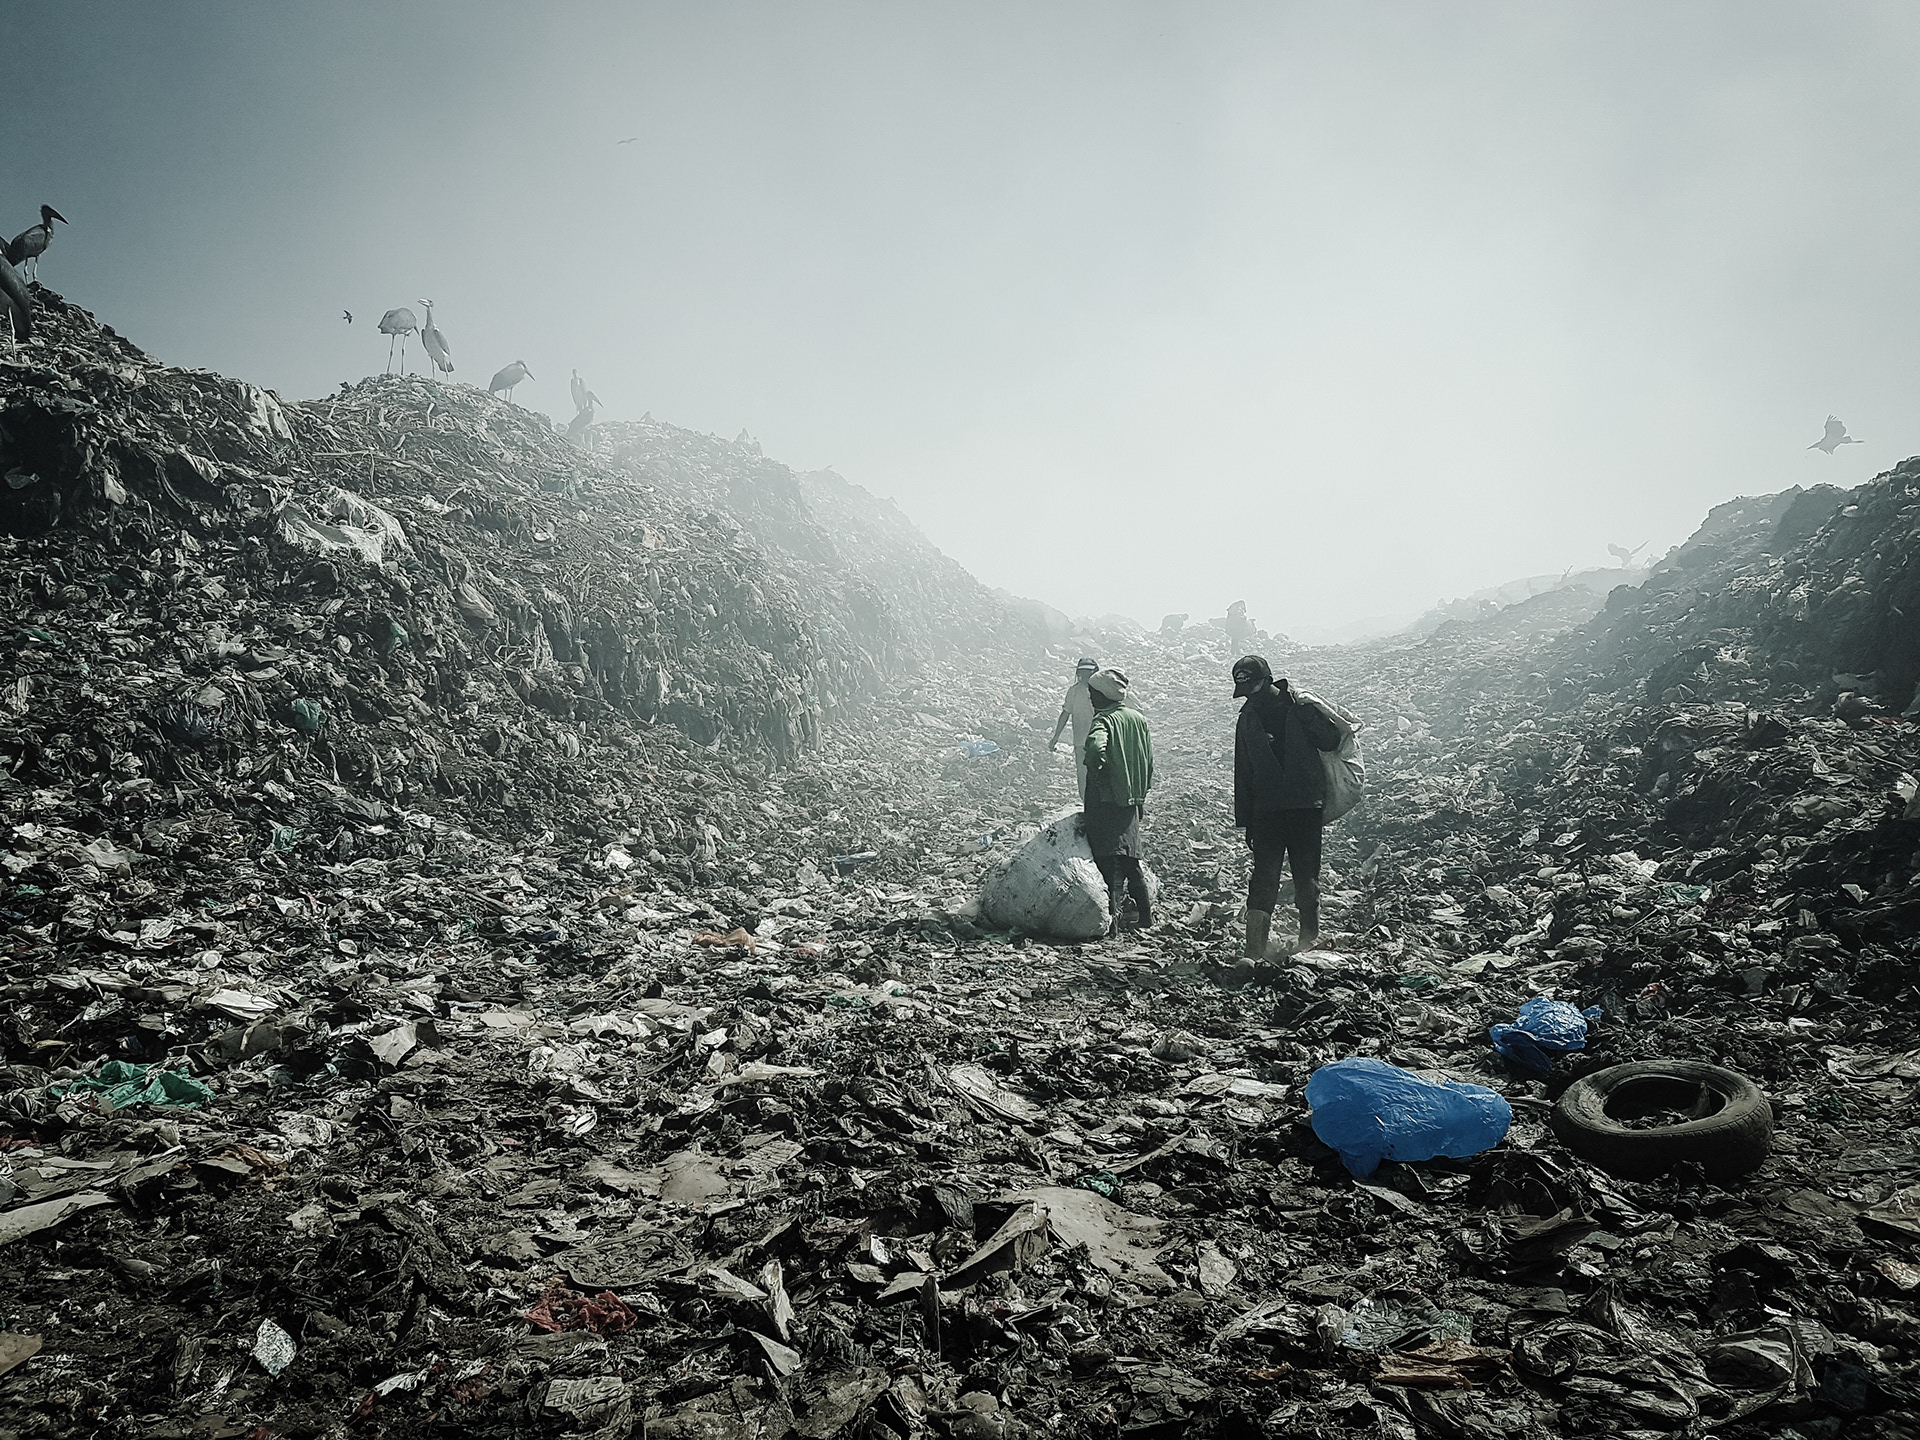 A landfill in Kenya full of waste from the fast fashion of Europe